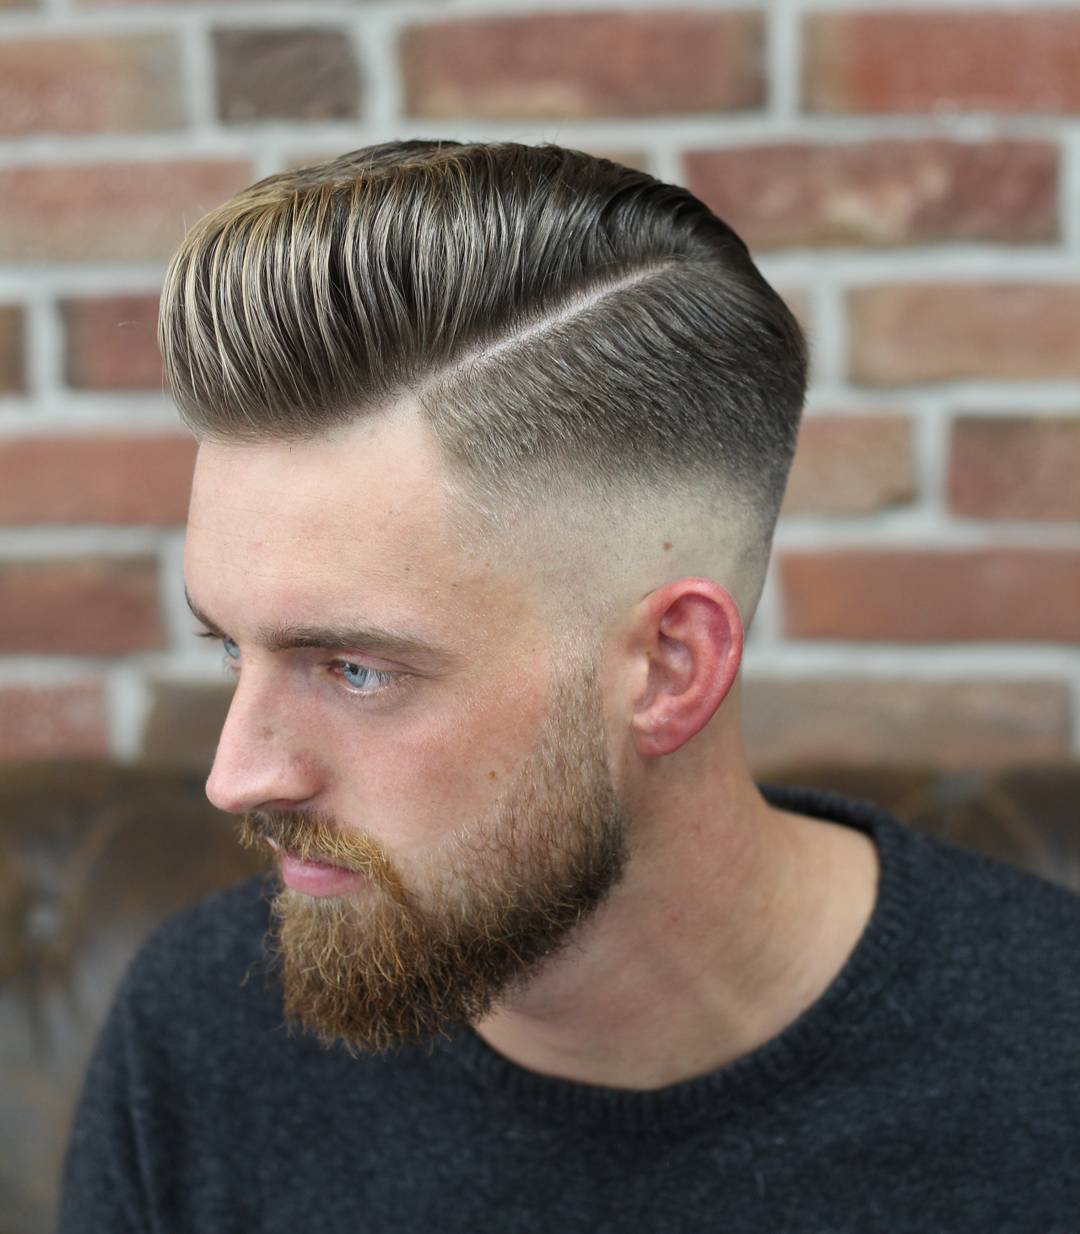 barber_djirlauw-cool-pompadour-hairstyle-mens-haircut